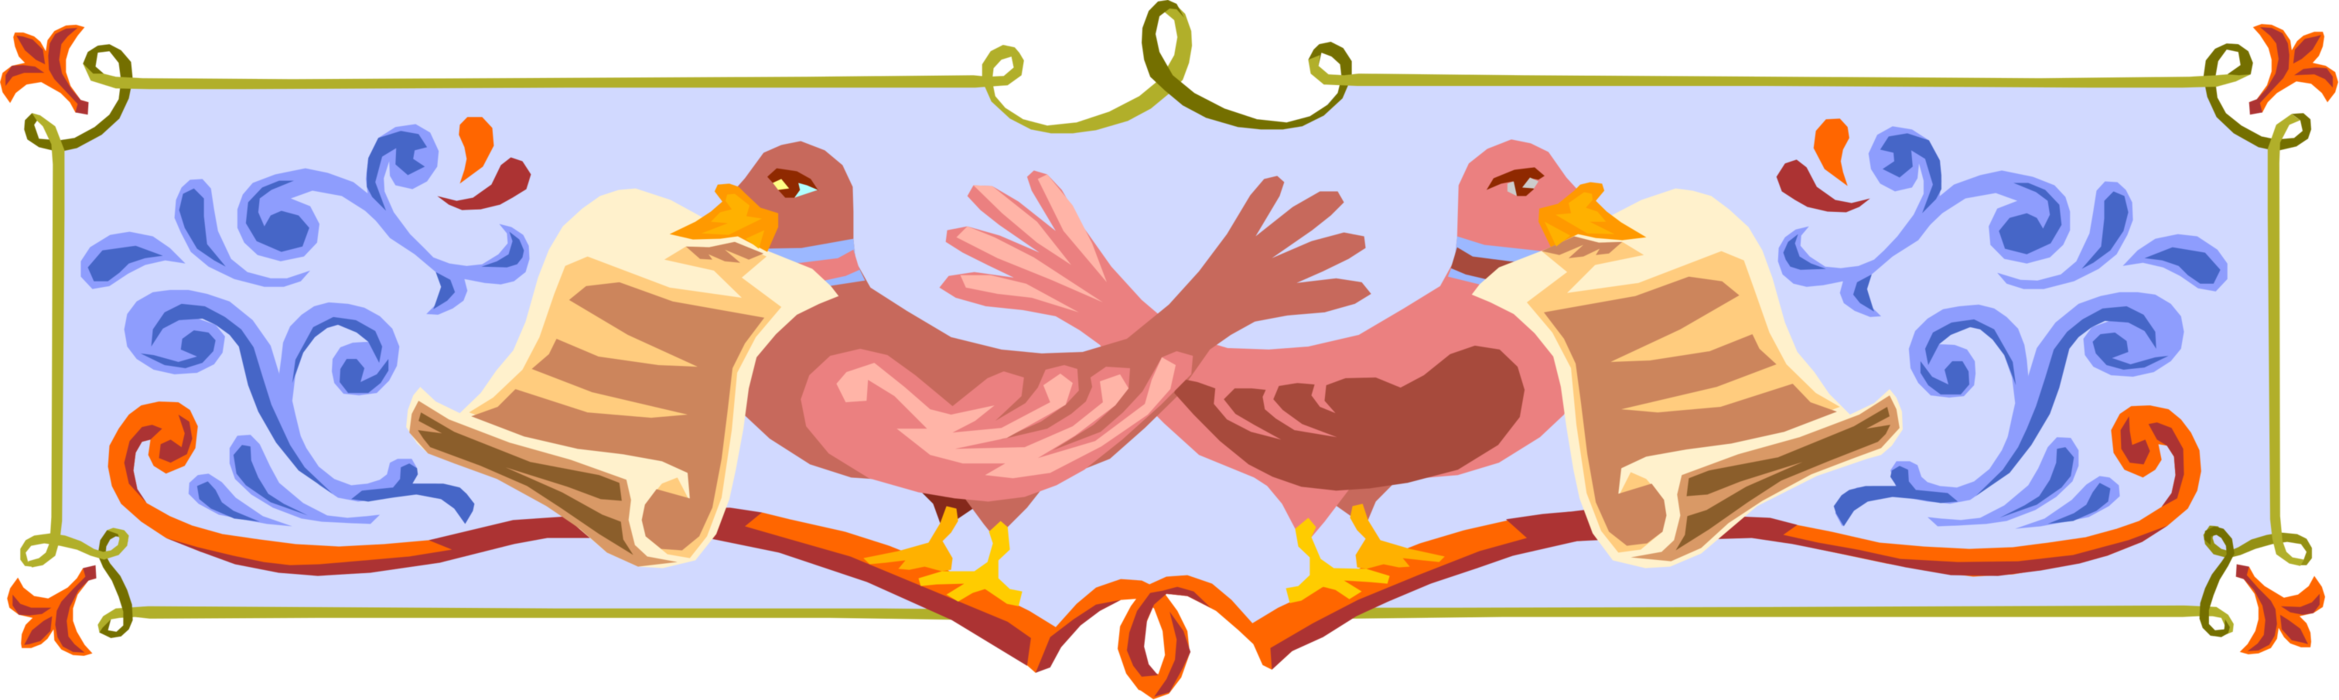 Vector Illustration of Pigeon Animals with Scroll Containing Writings Border